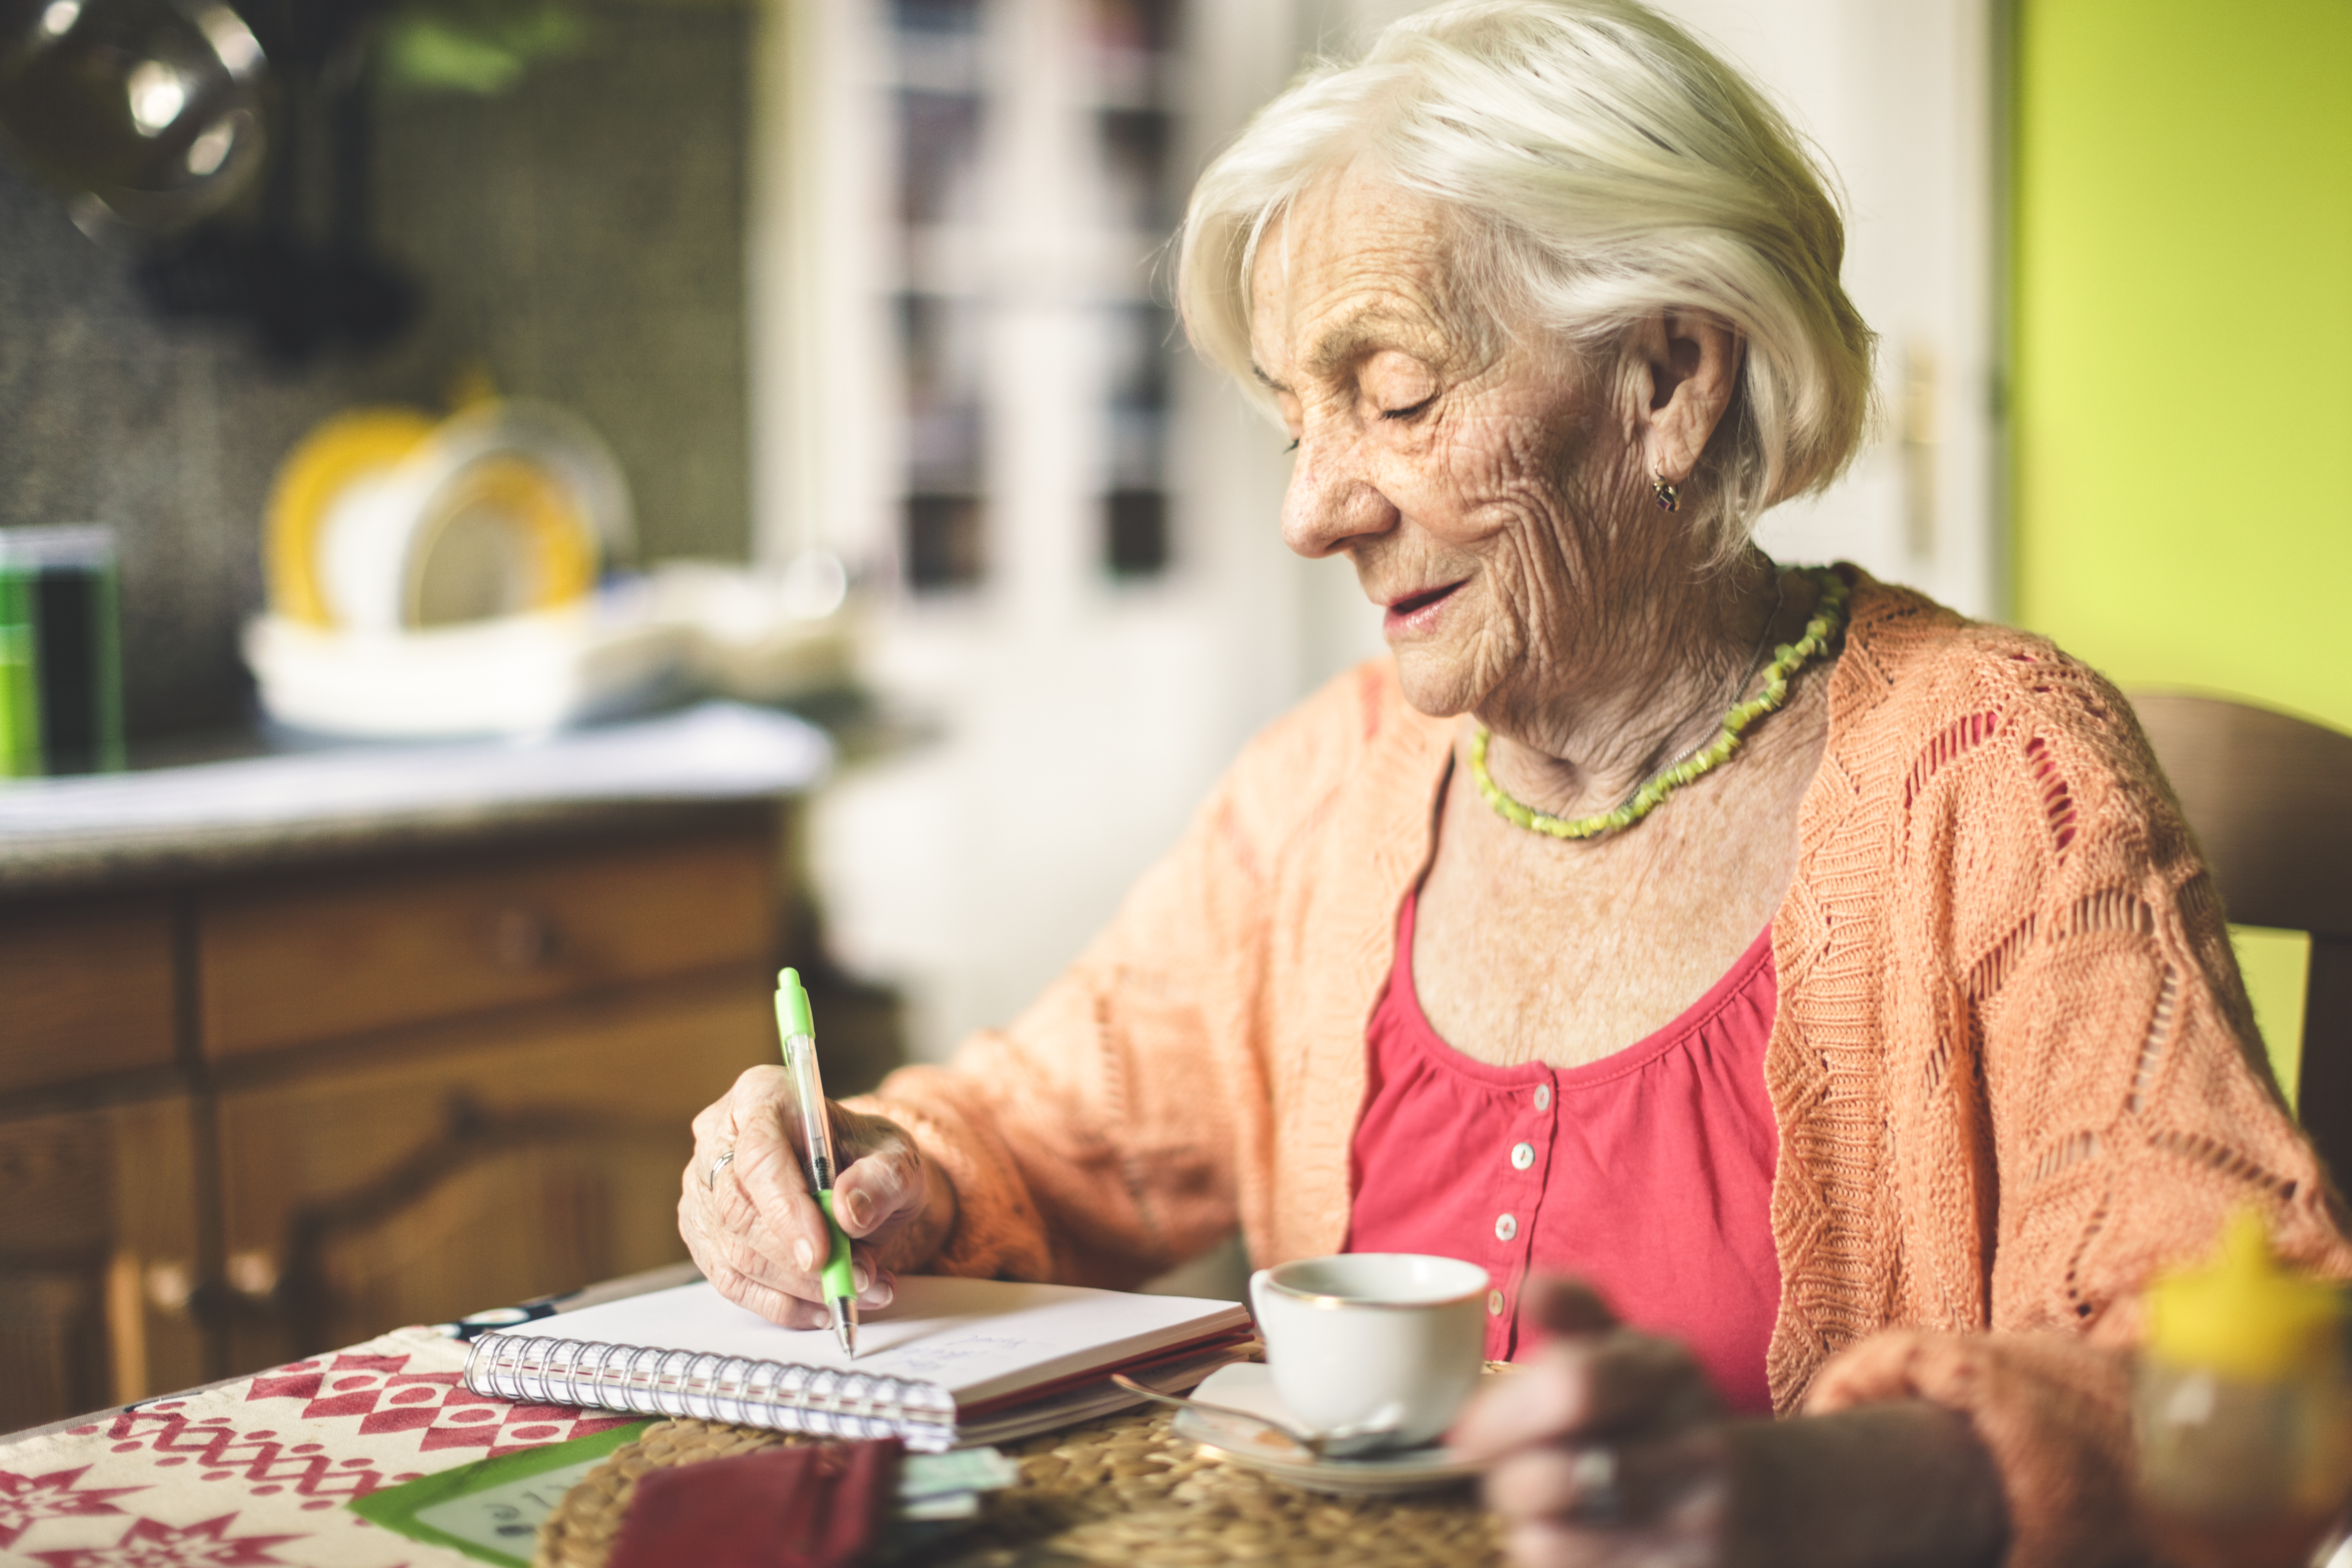 Senior woman calculating finances in her kitchen | Source: Getty Images